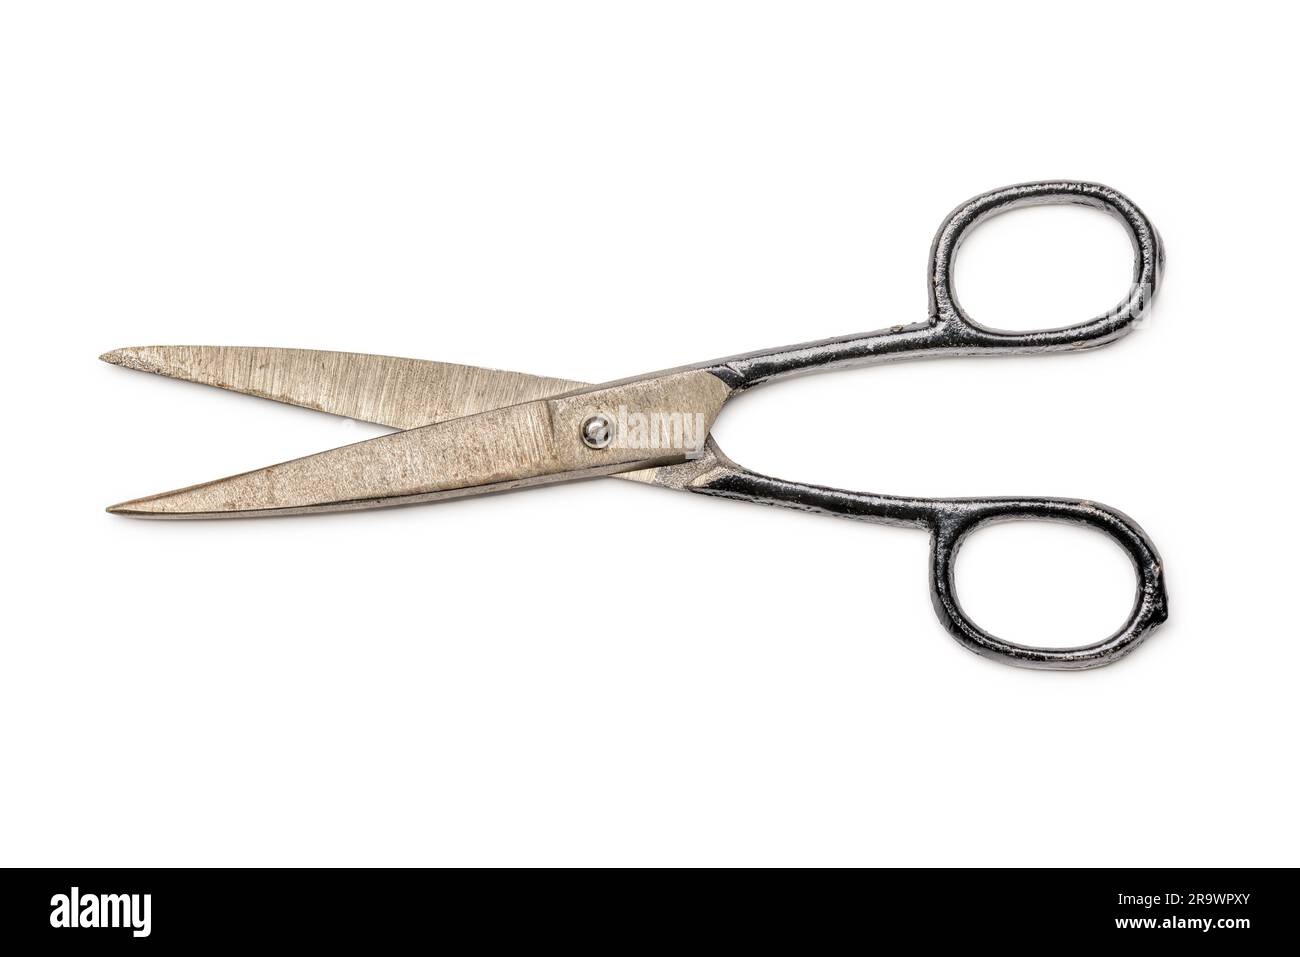 Antique scissors isolated on white background Stock Photo by